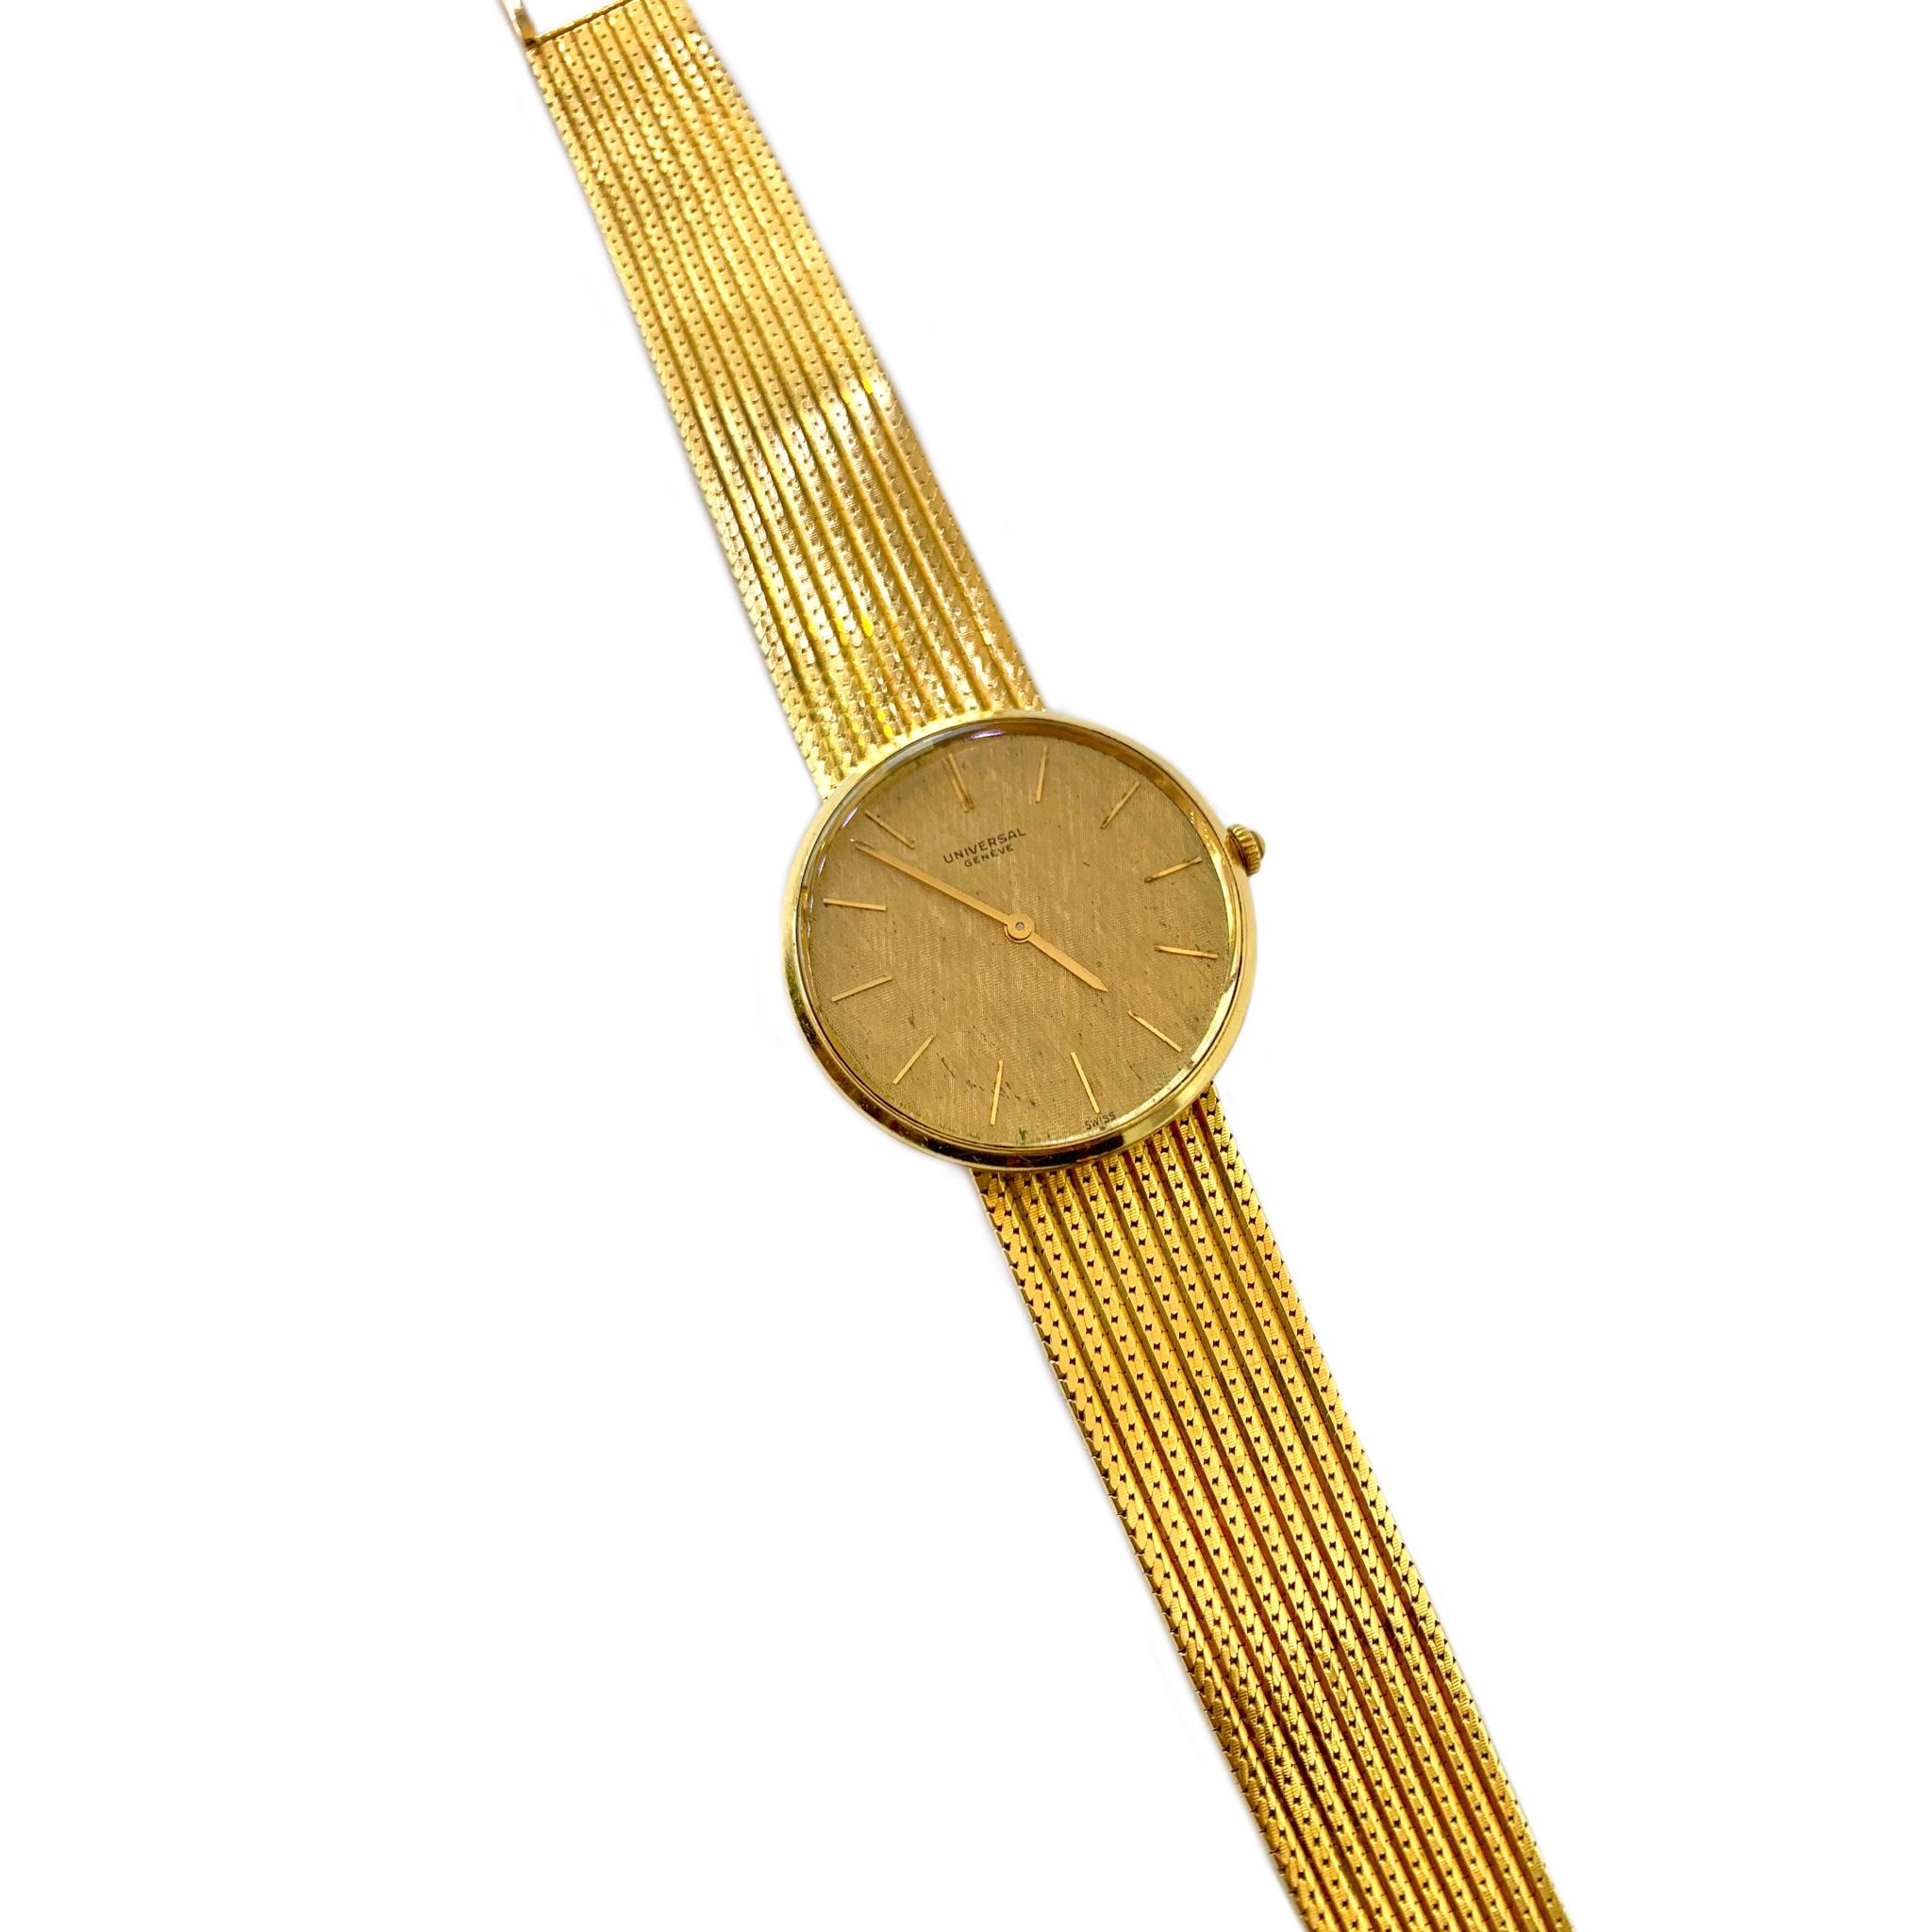 Universal Geneve 18 Karat Yellow Gold Wrist Watch circa 1960's. The watch contains the original 21 jewel mechanical wind movement. The design of the round dial is a unique cross hatch pattern enclosed within a 33mm case. The length of the band is 7